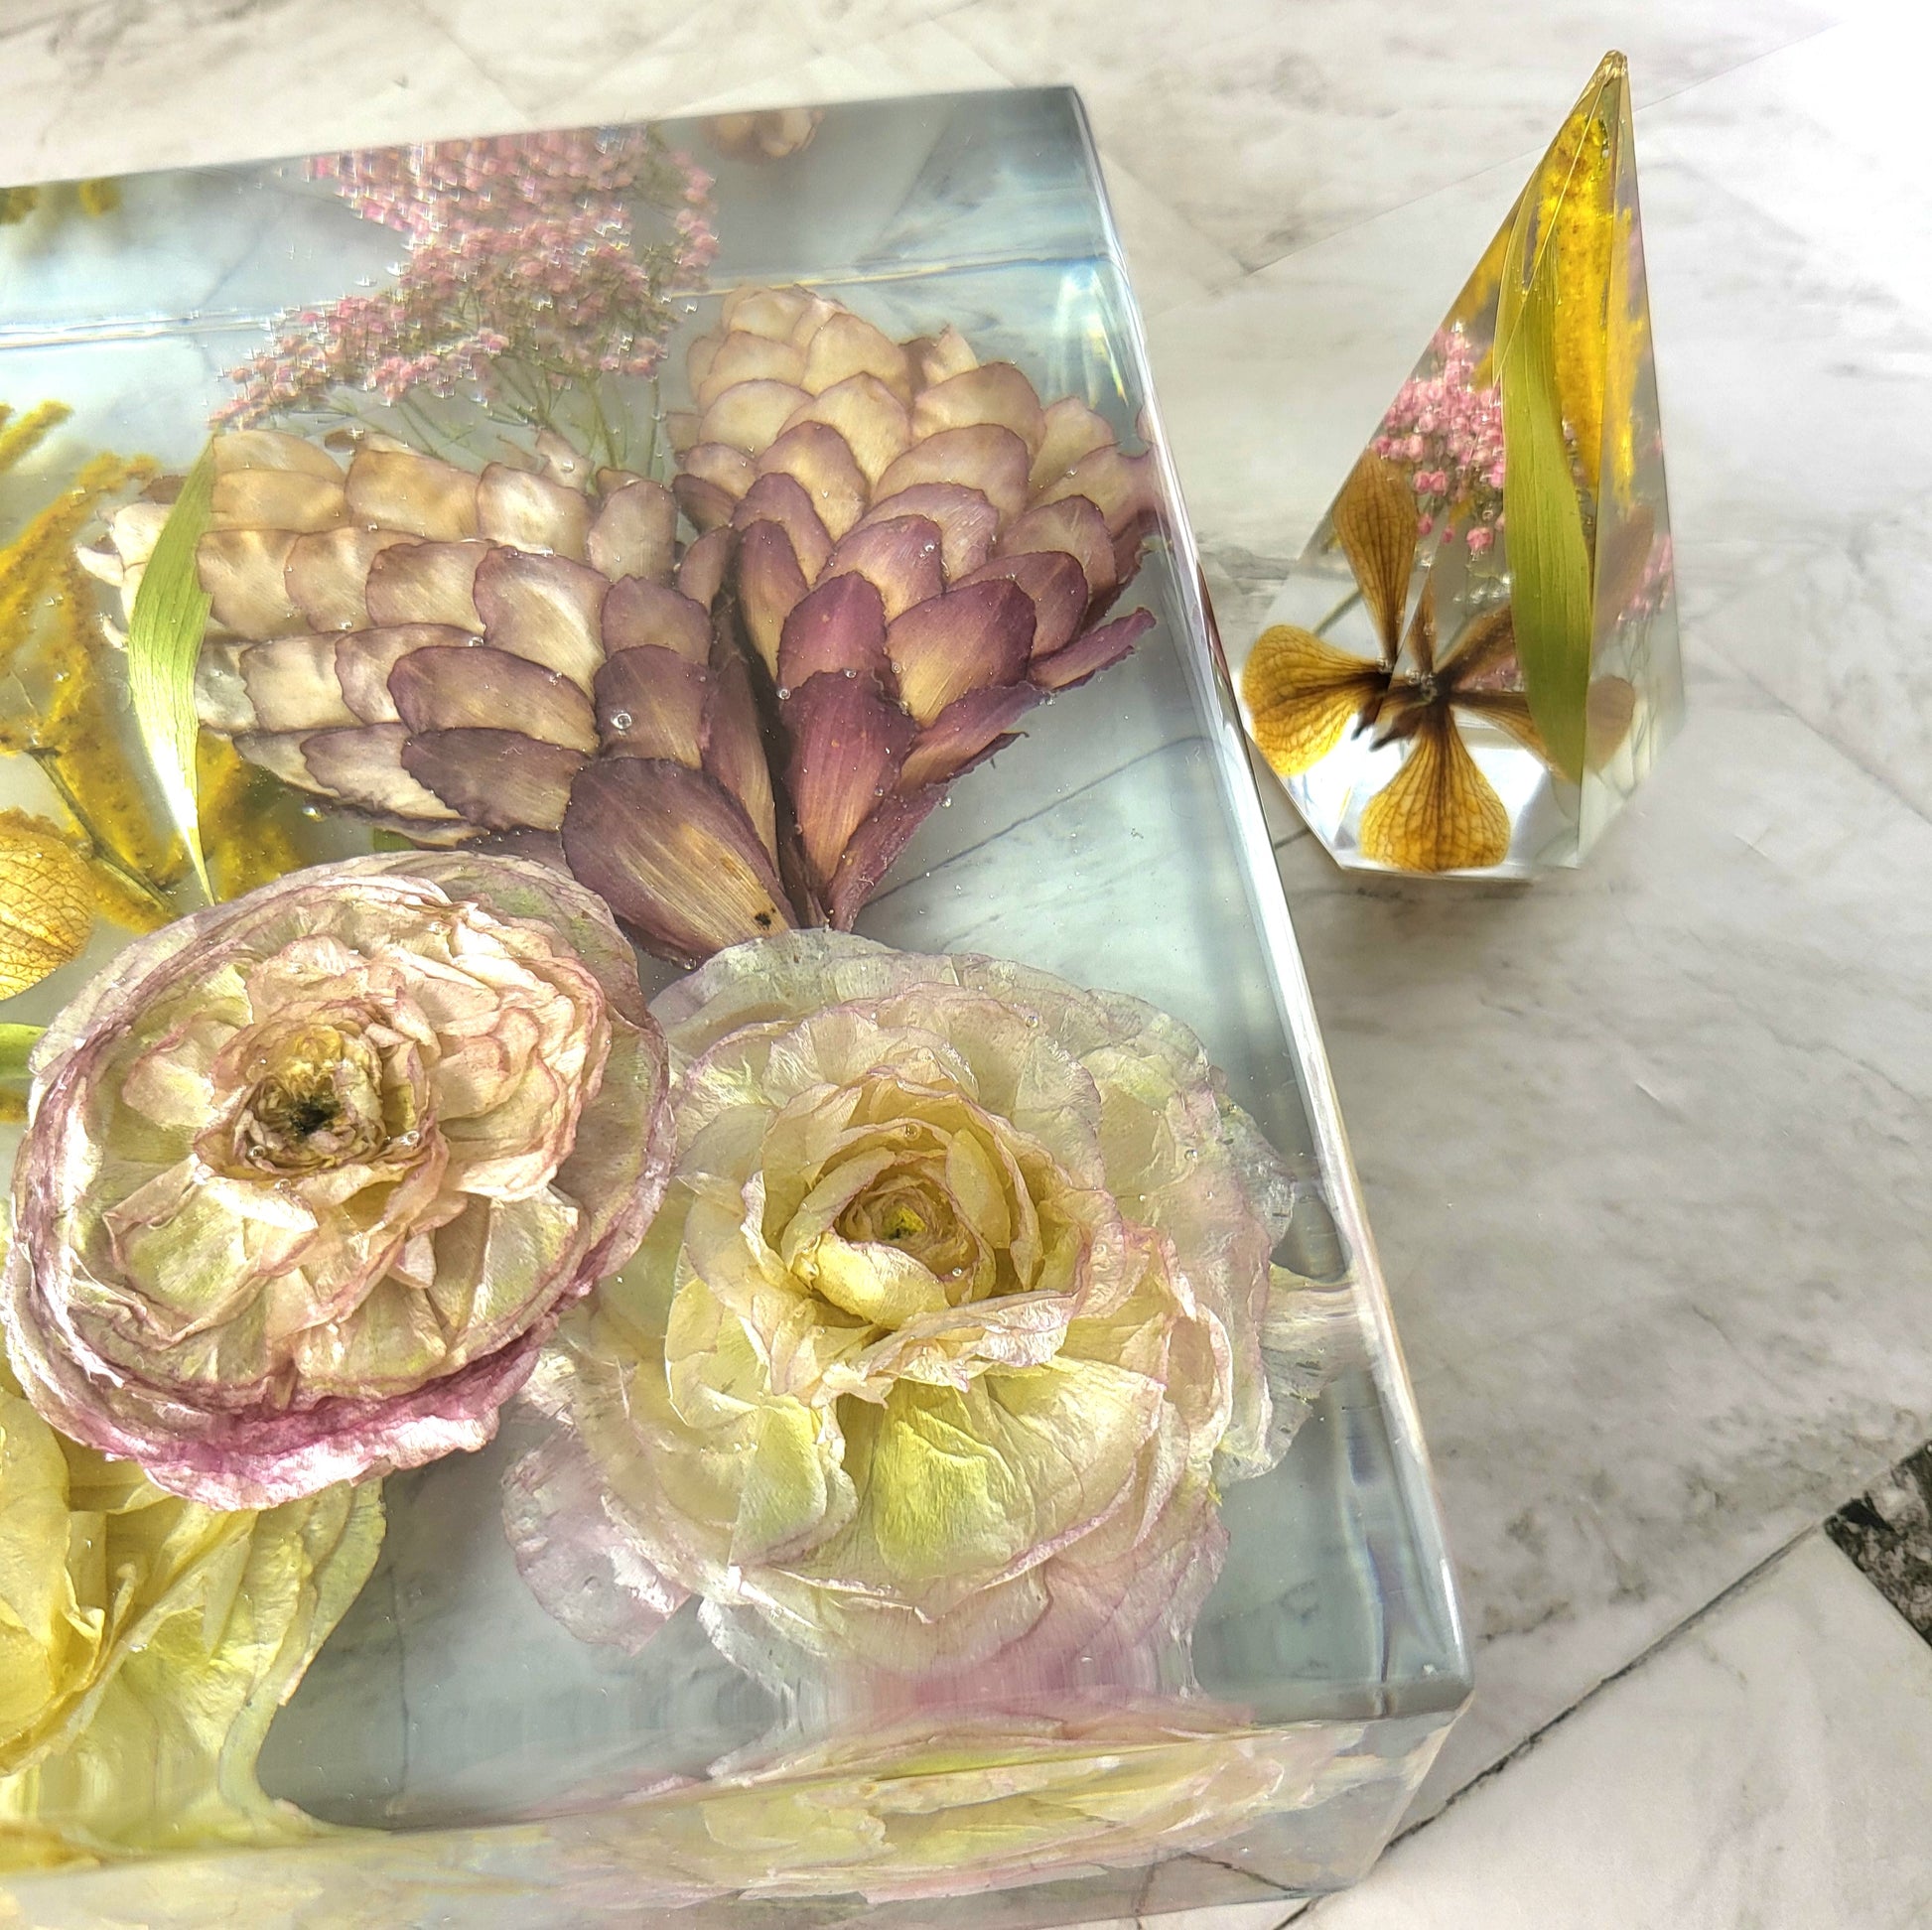 Tropical 8"x 8" 3D Floral Resin Cube Wedding Bouquet Preservation Modern Fried Flowers Square Save Your Gift Keepsake - flofloflowery